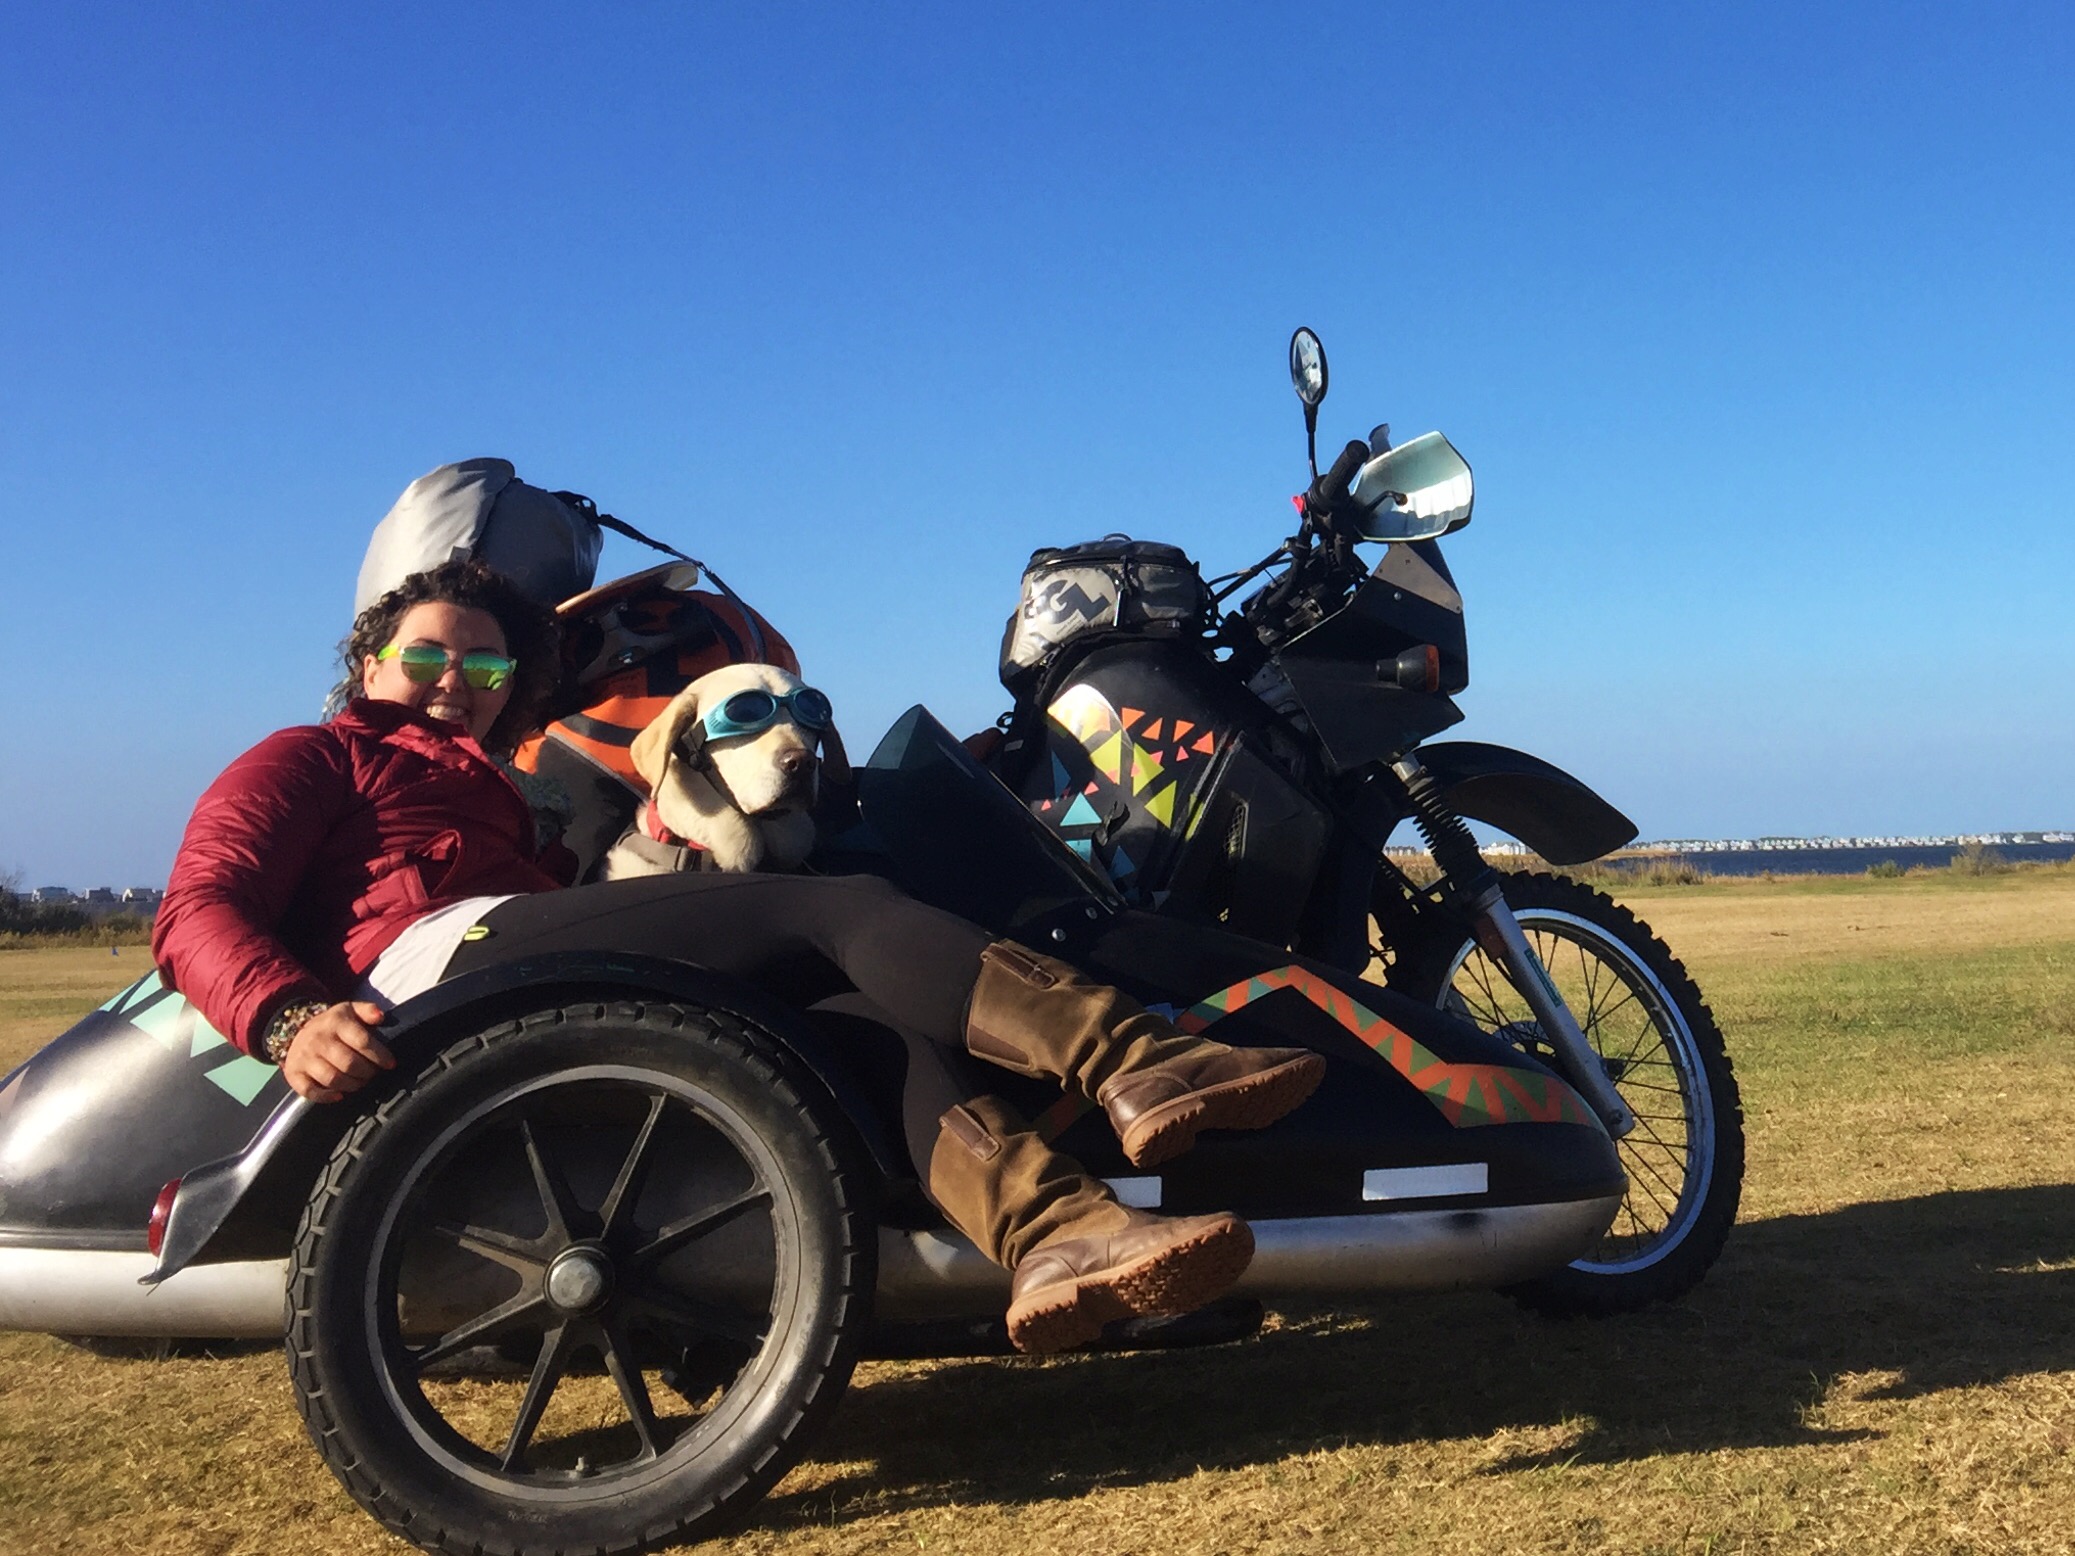 Operation Moto Dog featuring Mallory Paige, Baylor the dog and Rufio the motorcycle/sidecar.